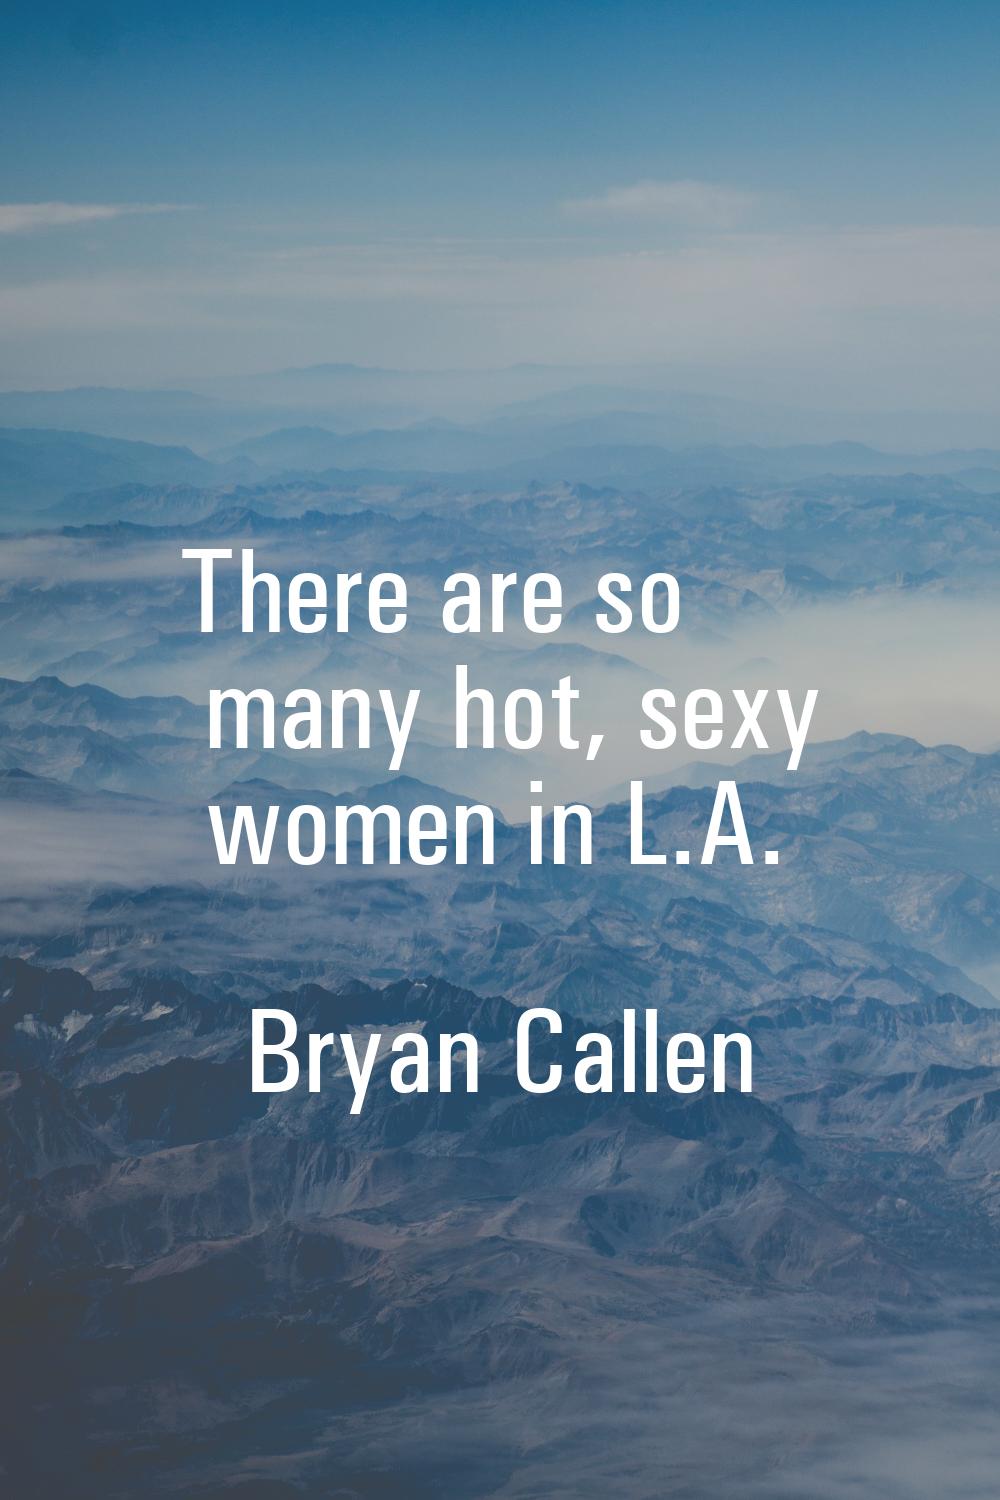 There are so many hot, sexy women in L.A.